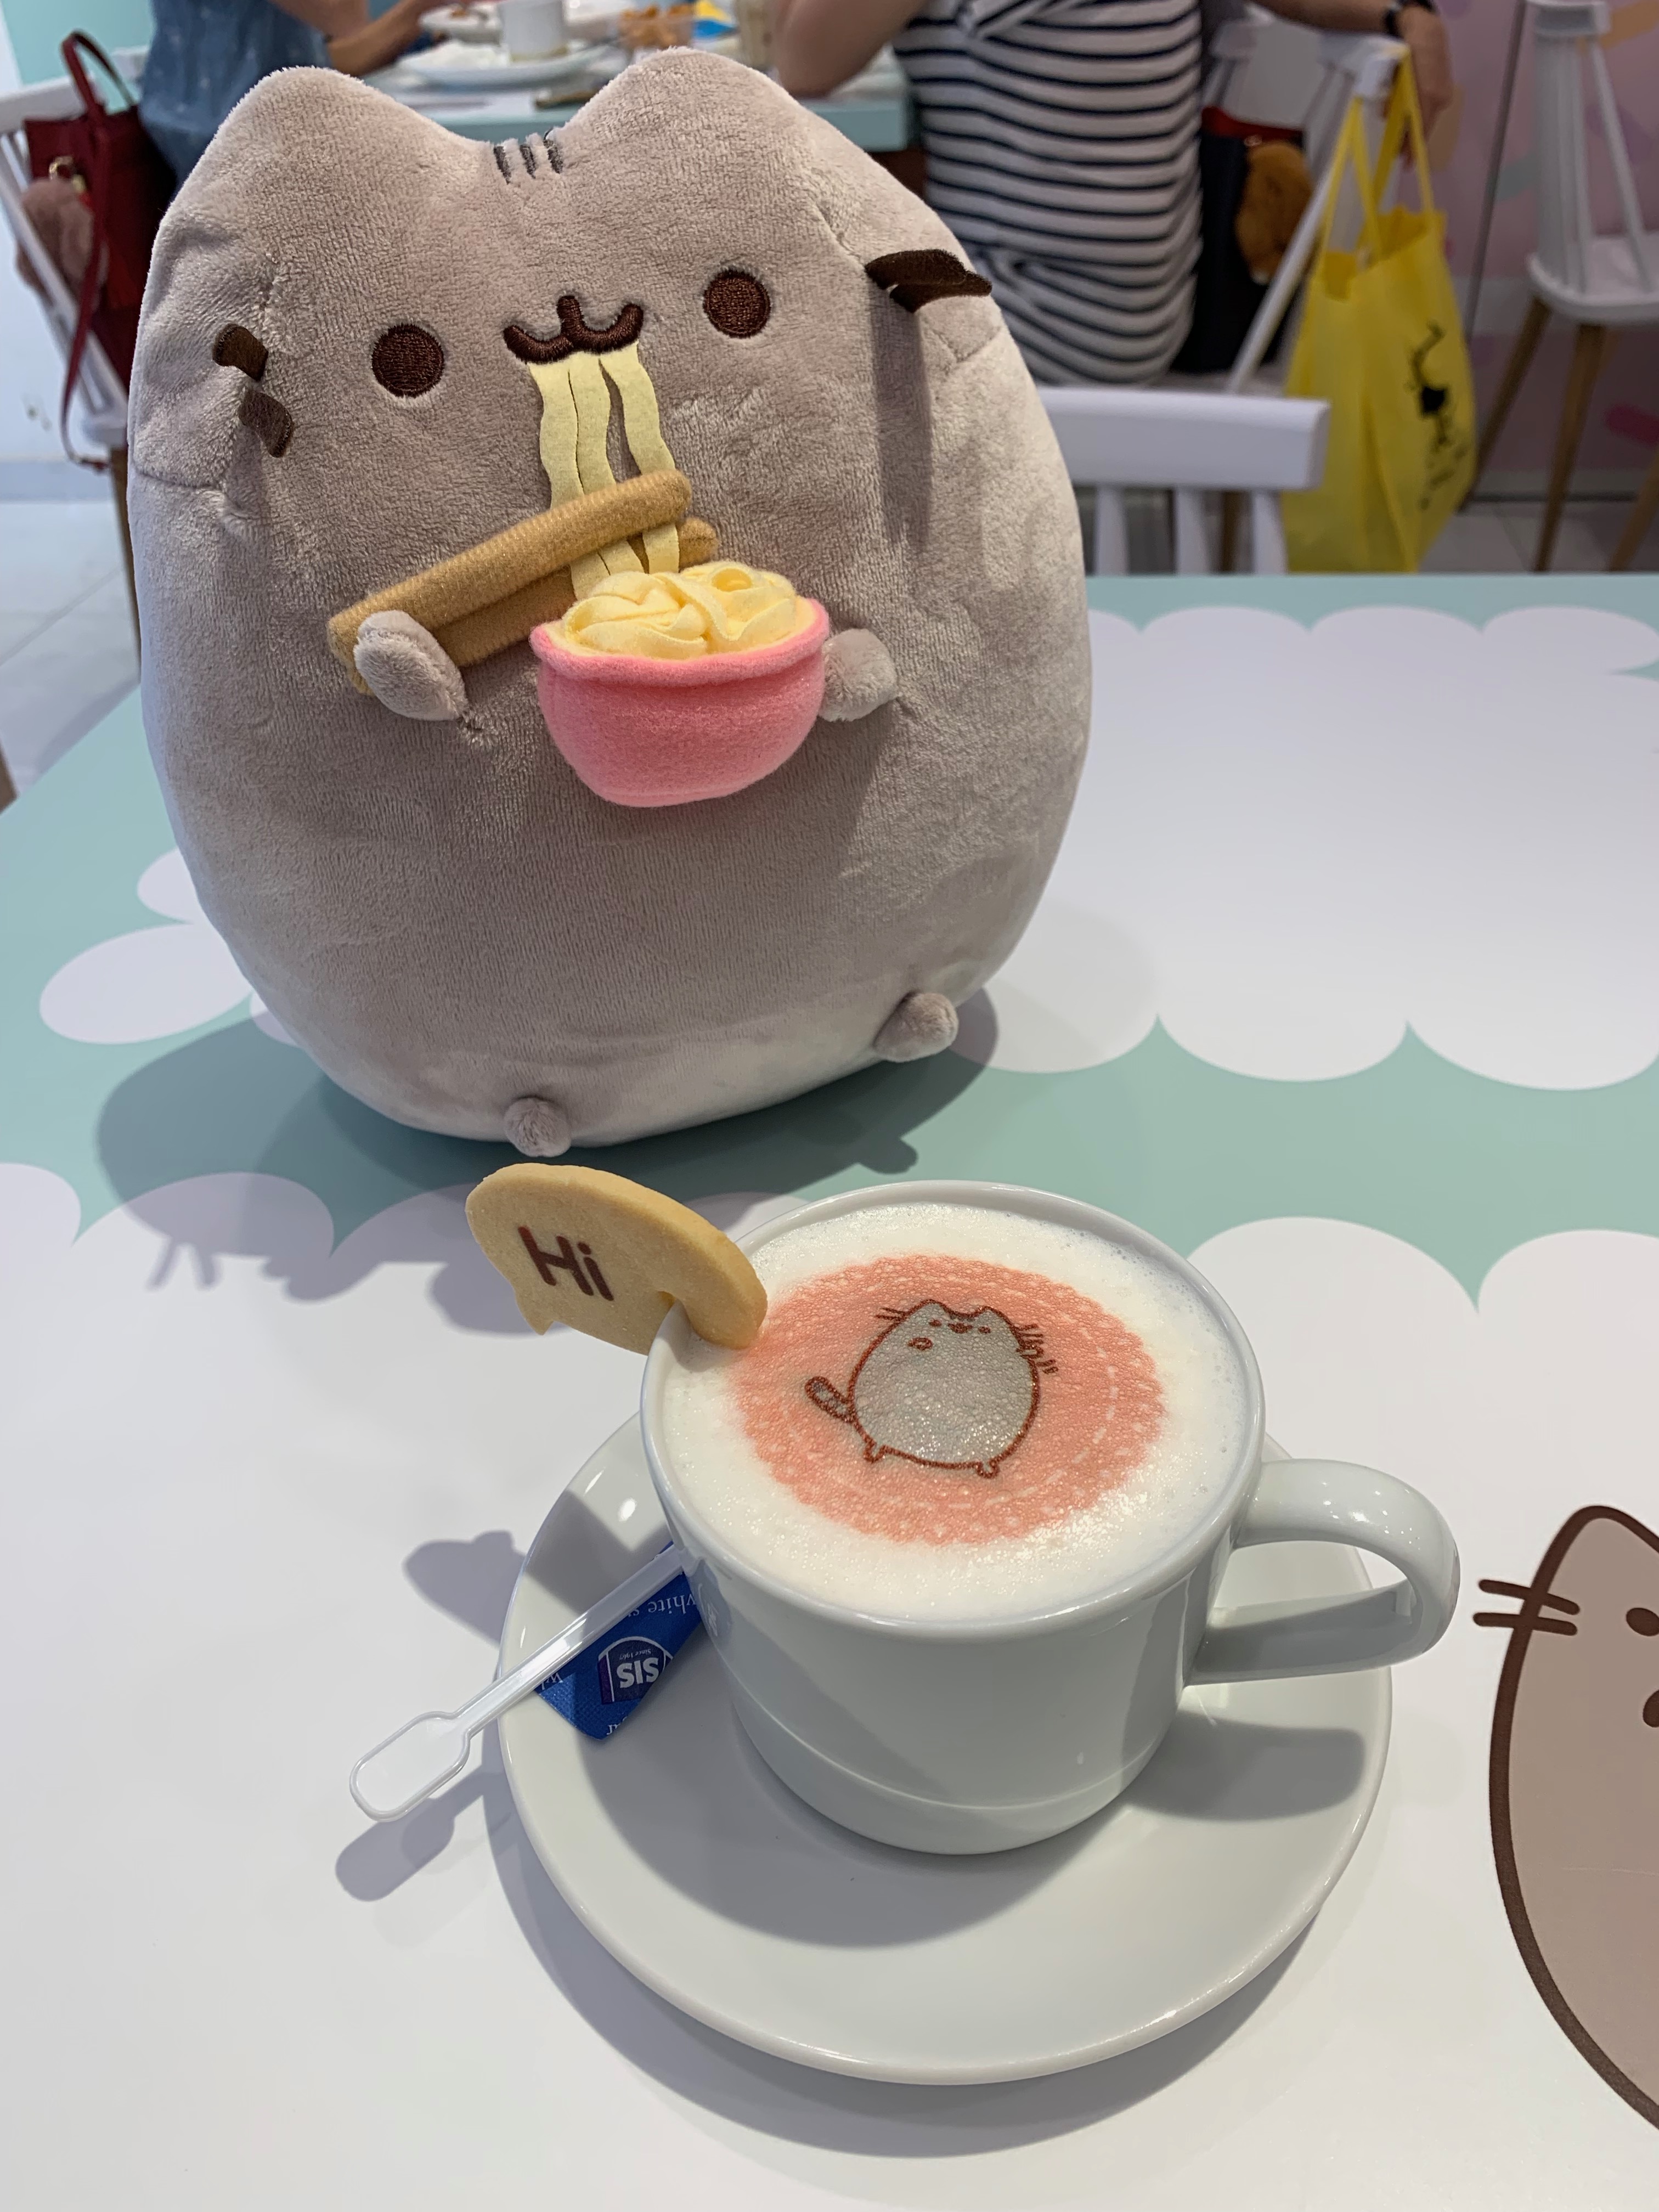 We spent over $100 at the world's first Pusheen cafe - here are the